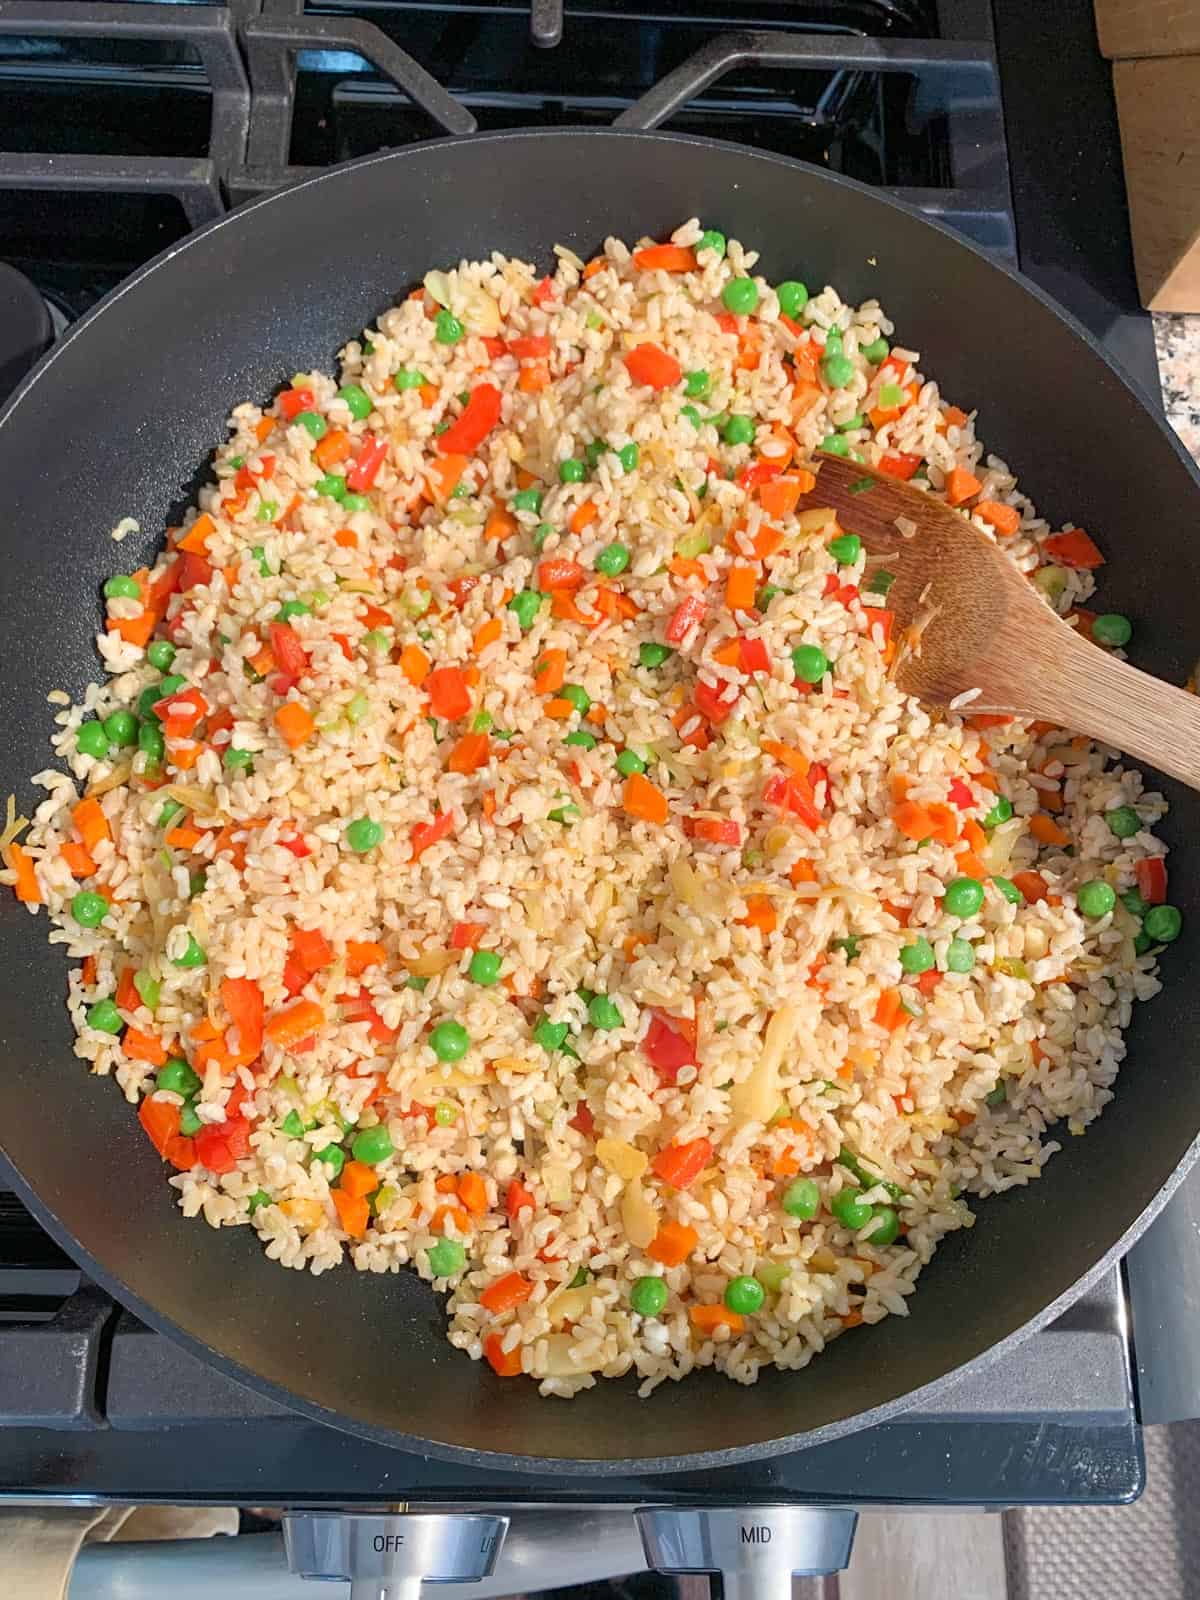 Leftover rice mixed into the vegetables.